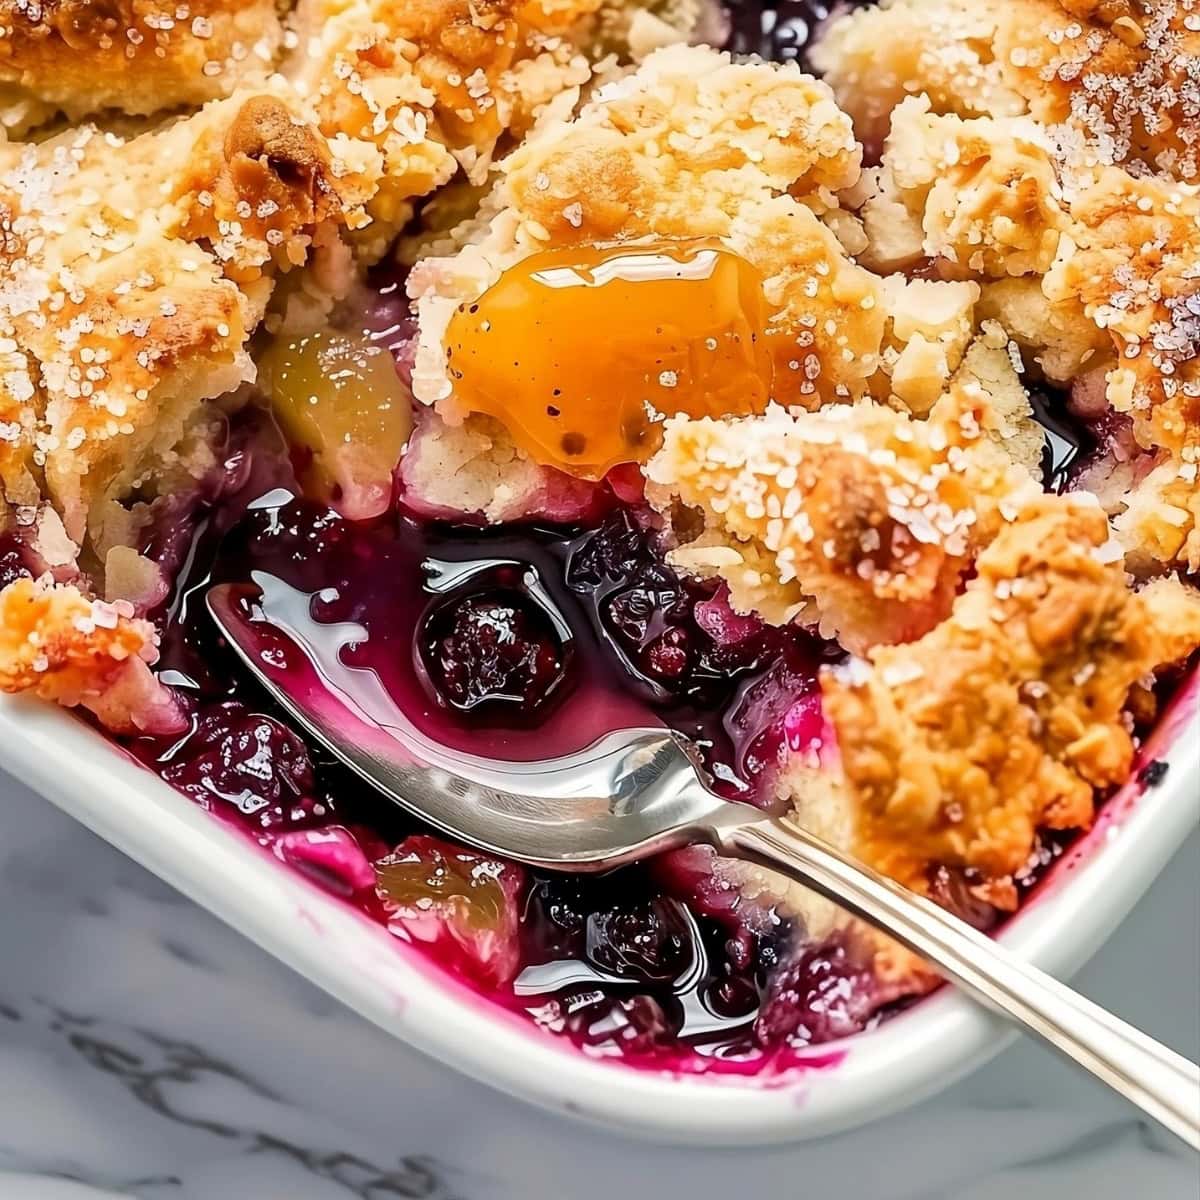 Peach and Blueberry Cobbler - Insanely Good